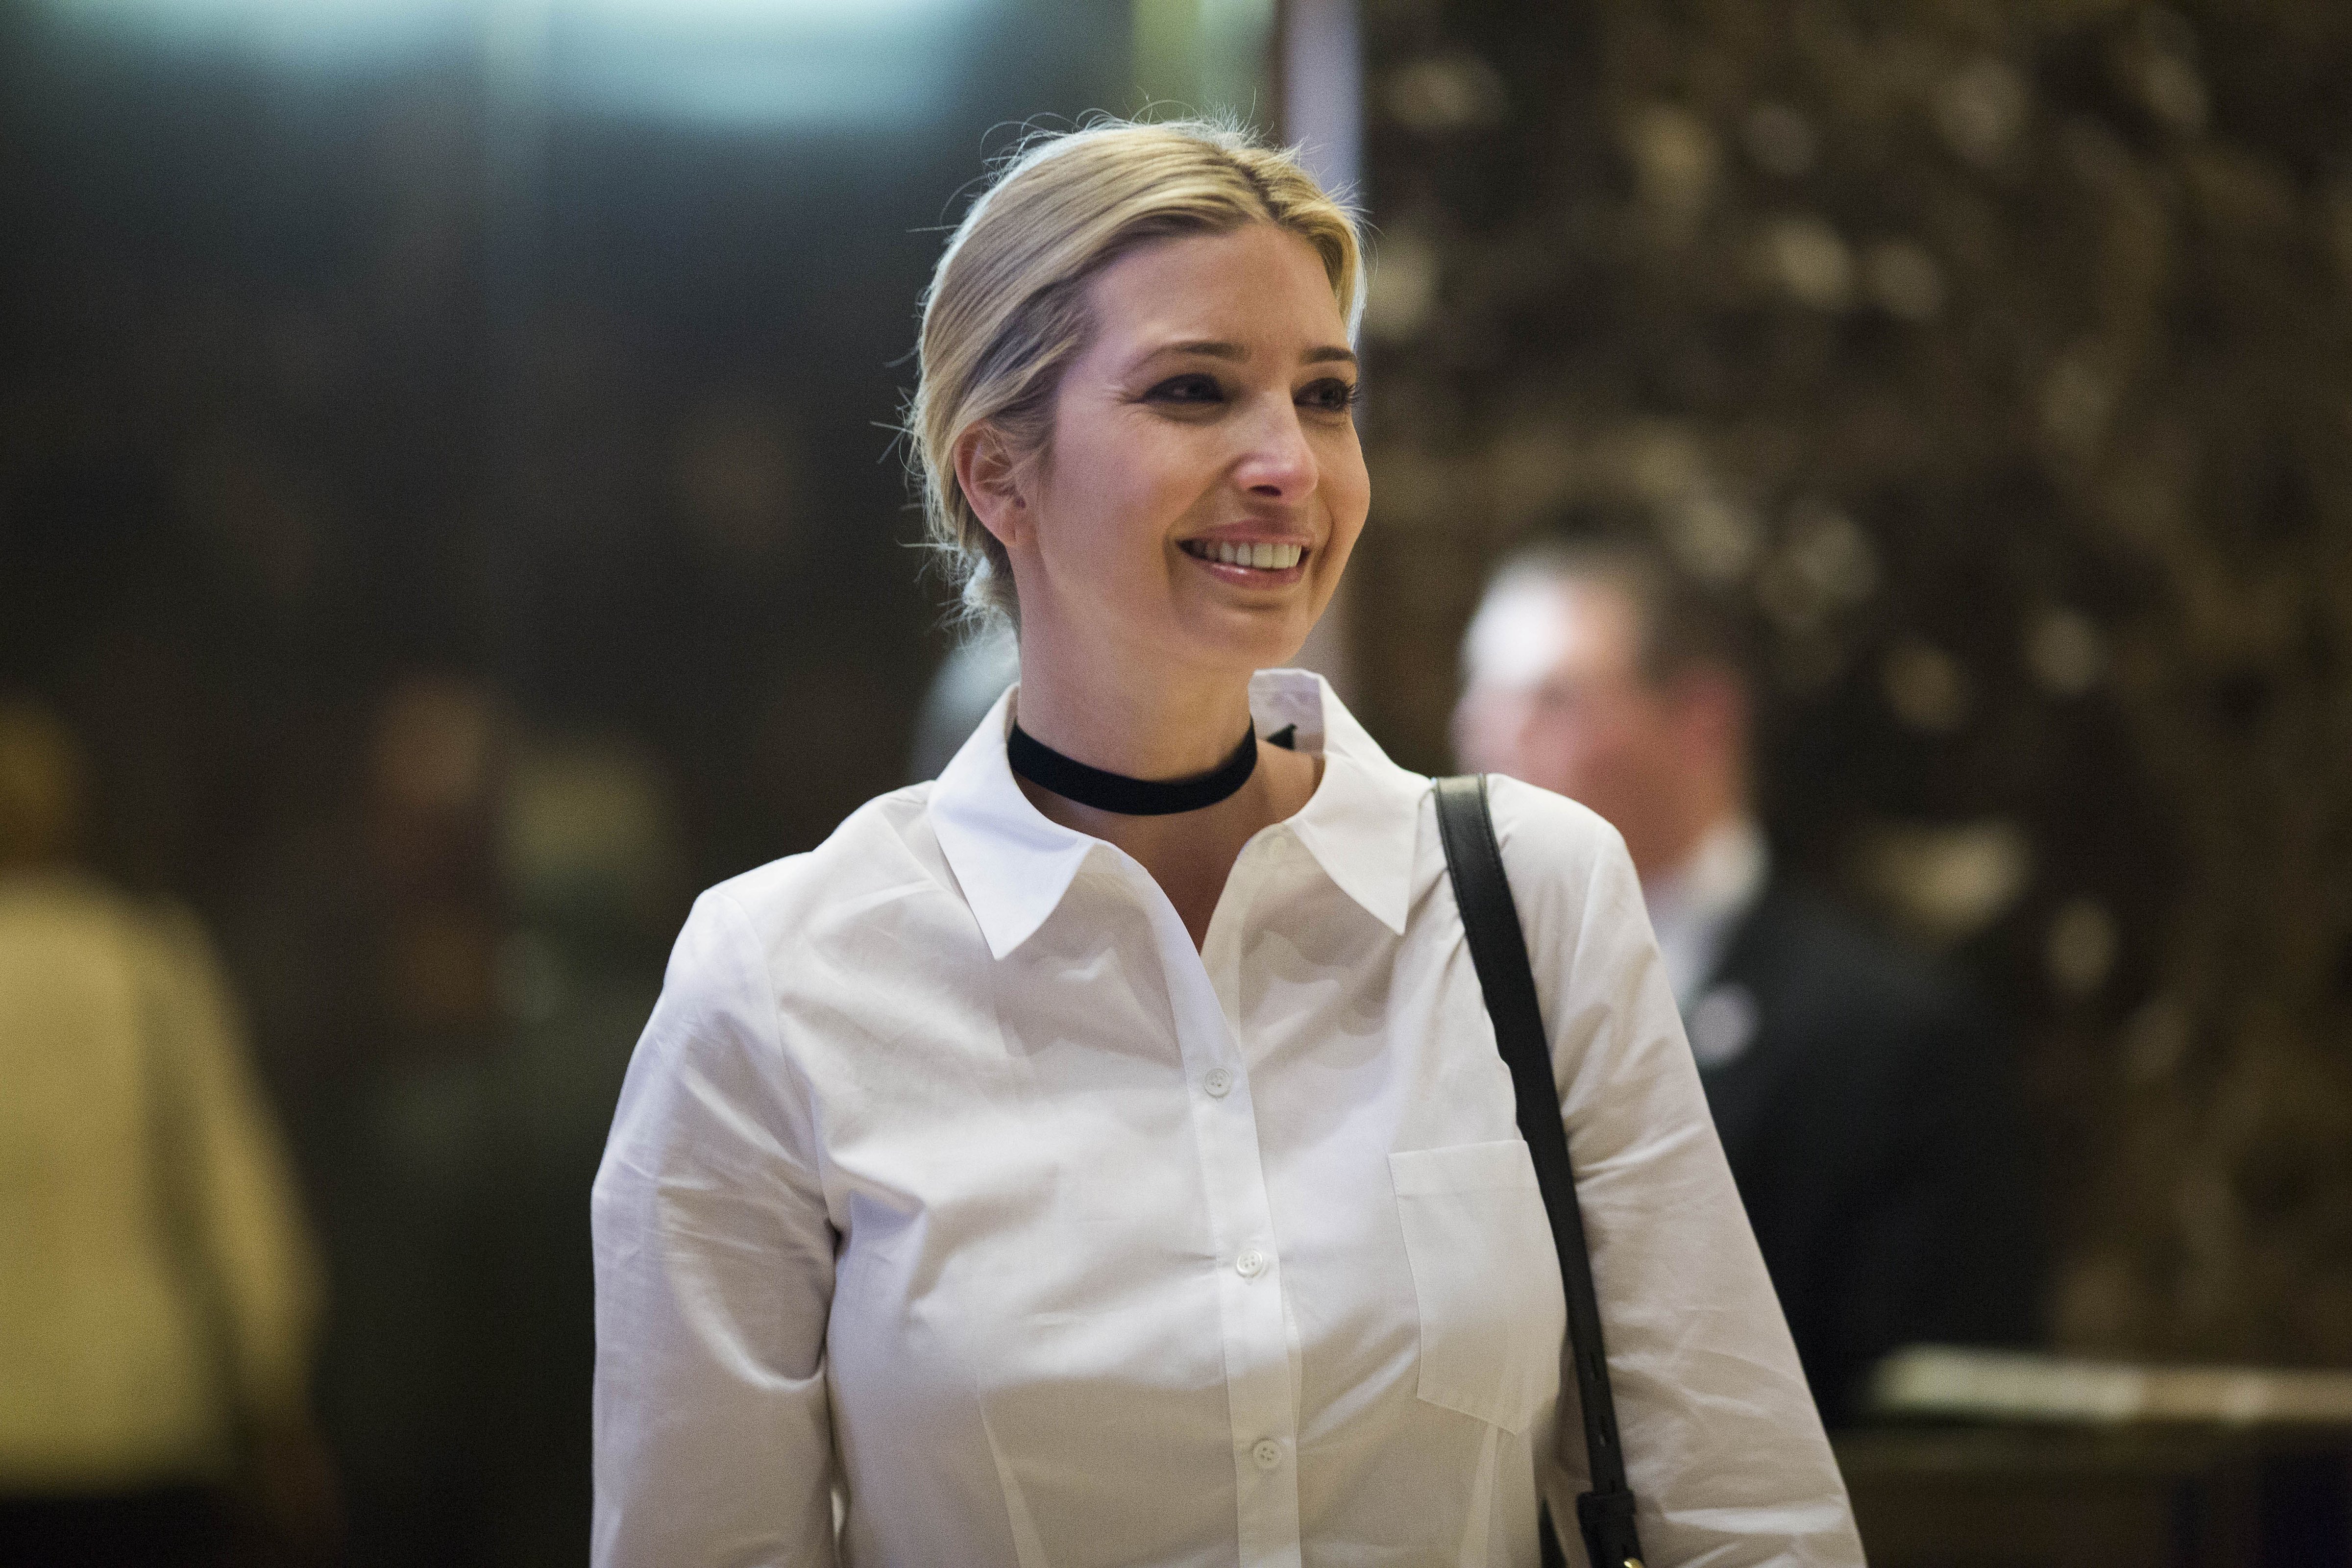 Ivanka Trump, daughter of U.S. President-elect Donald Trump, arrives at Trump Tower in New York, U.S., on Friday, Nov. 18, 2016. Donald Trump on Friday selected Alabama Senator Jeff Sessions as his attorney general, elevating one of his earliest congressional backers and one of the most conservative U.S. lawmakers to serve as the nation's top law enforcement official. Photographer: John Taggart/Bloomberg via Getty Images (Bloomberg—Bloomberg via Getty Images)